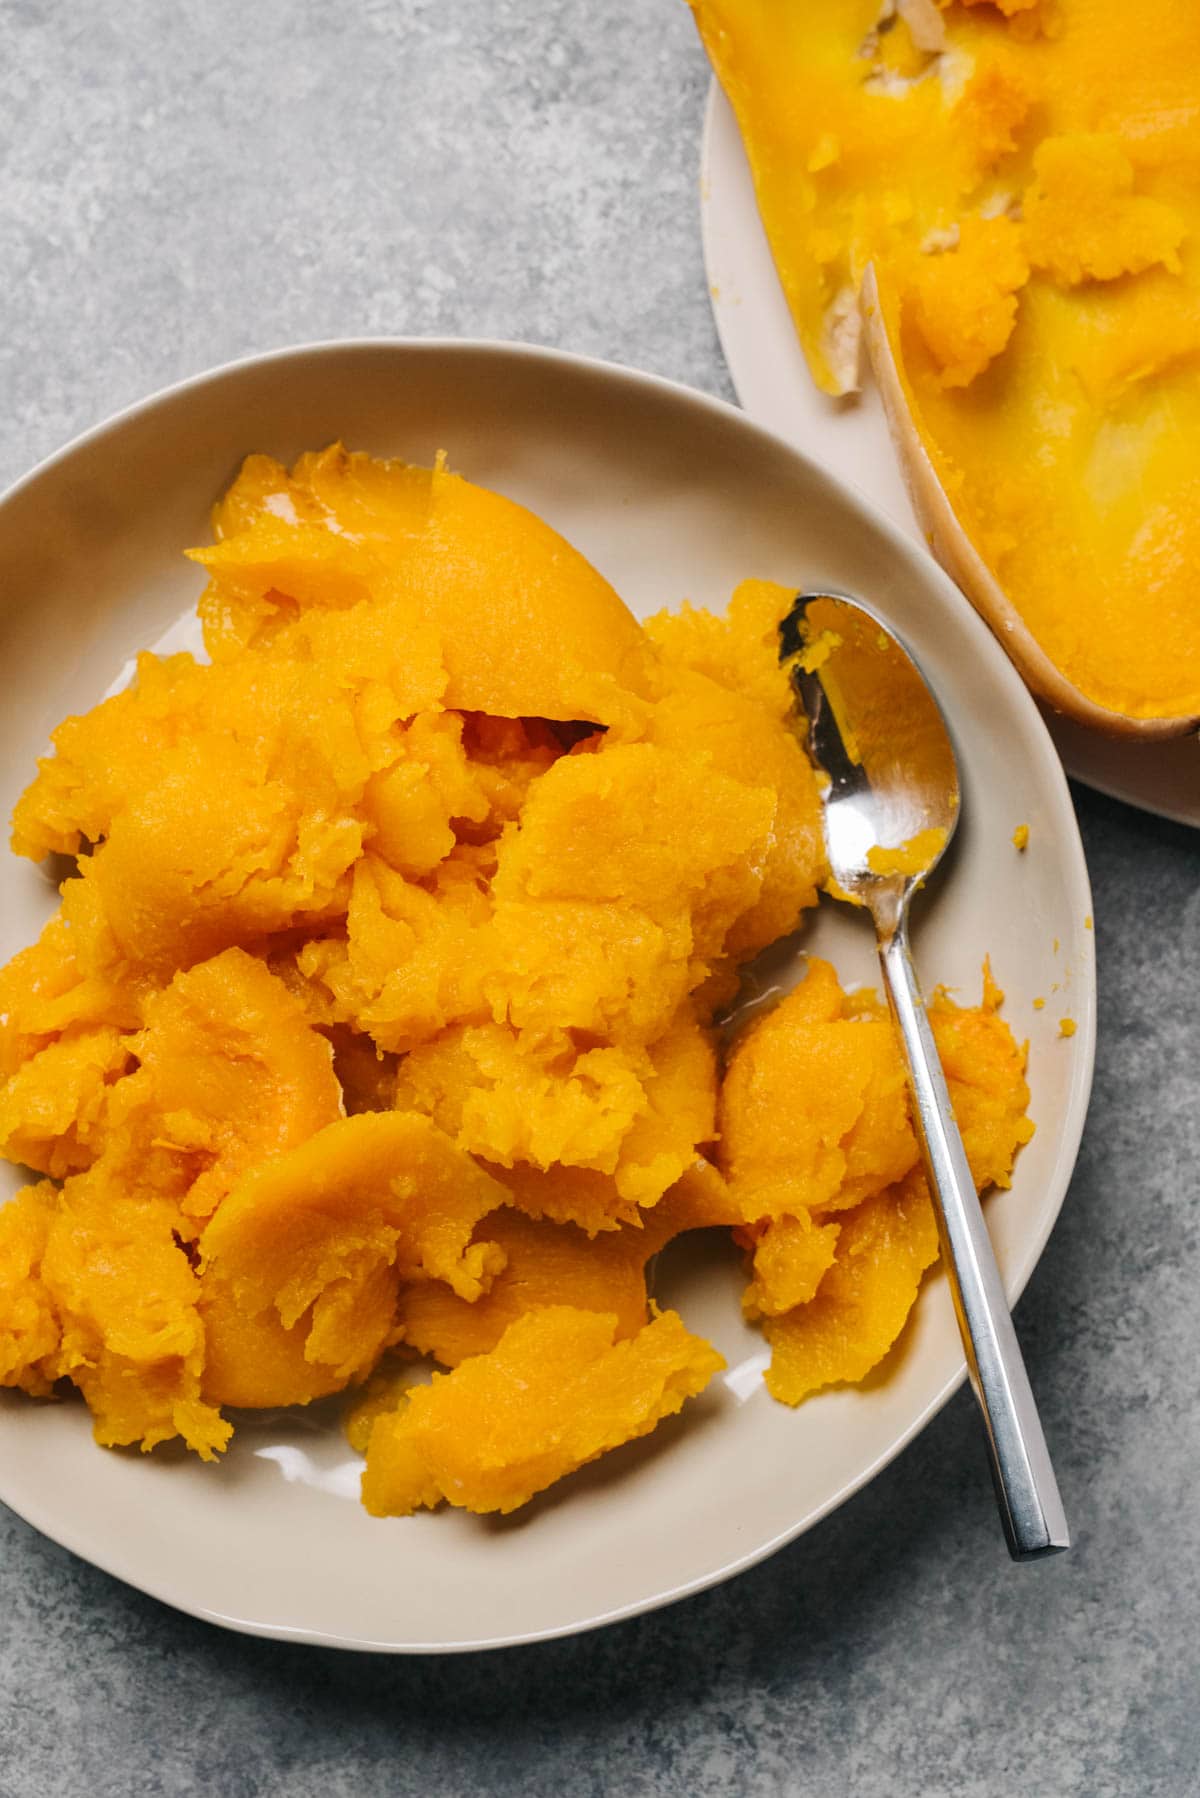 The flesh from slow cooker butternut squash scooped out of the skin and transfer to a low tan bowl.